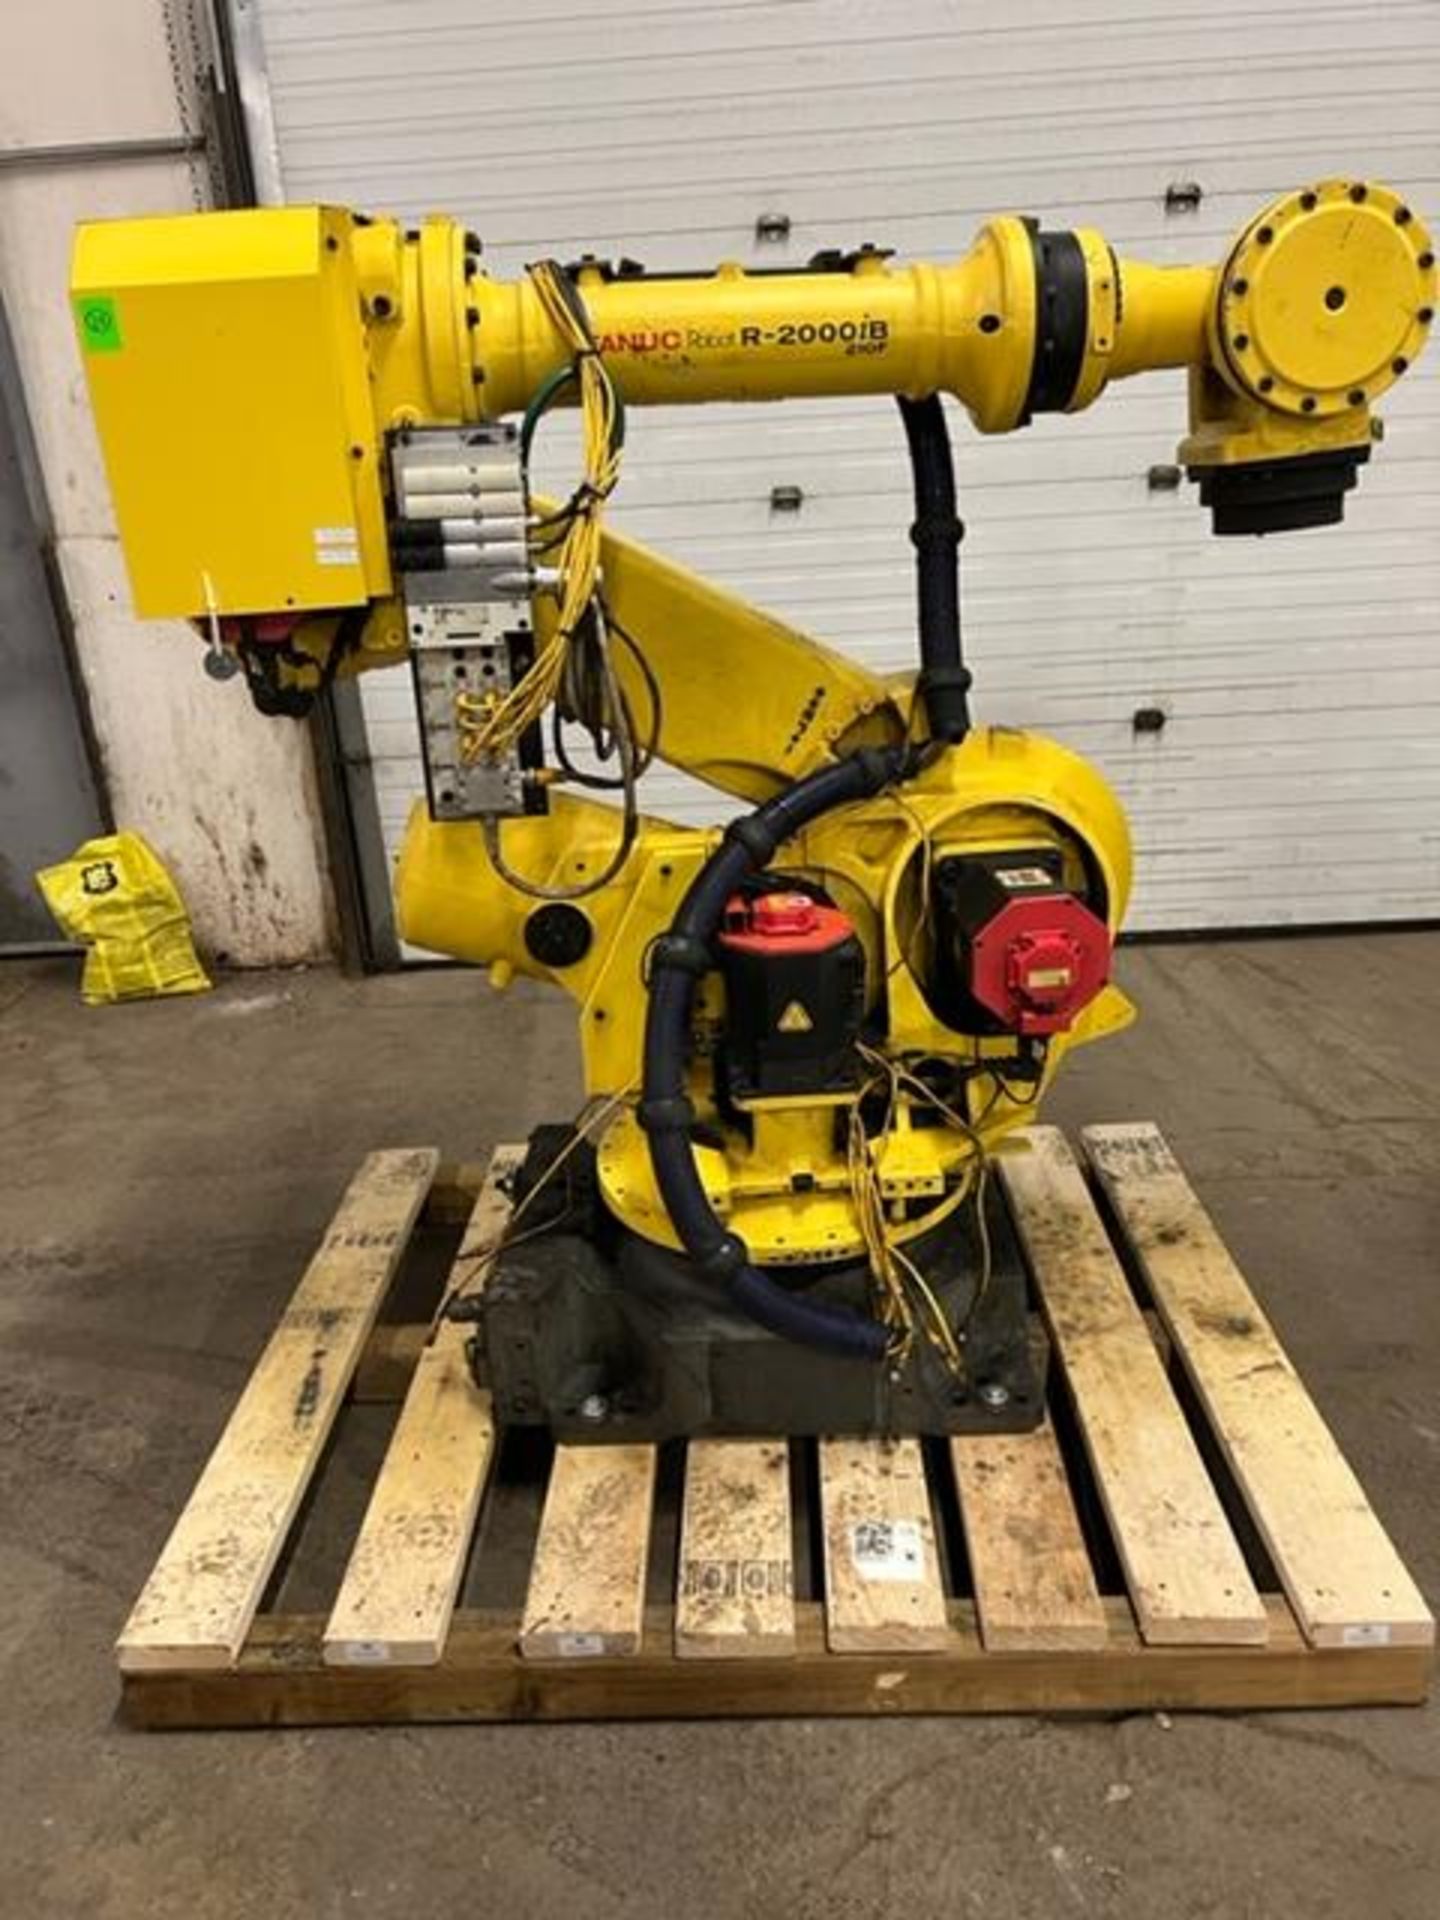 MINT 2012 Fanuc Handling Robot Model R-2000iB 210F - 210kg payload with R-30iA Controller and - Image 3 of 3